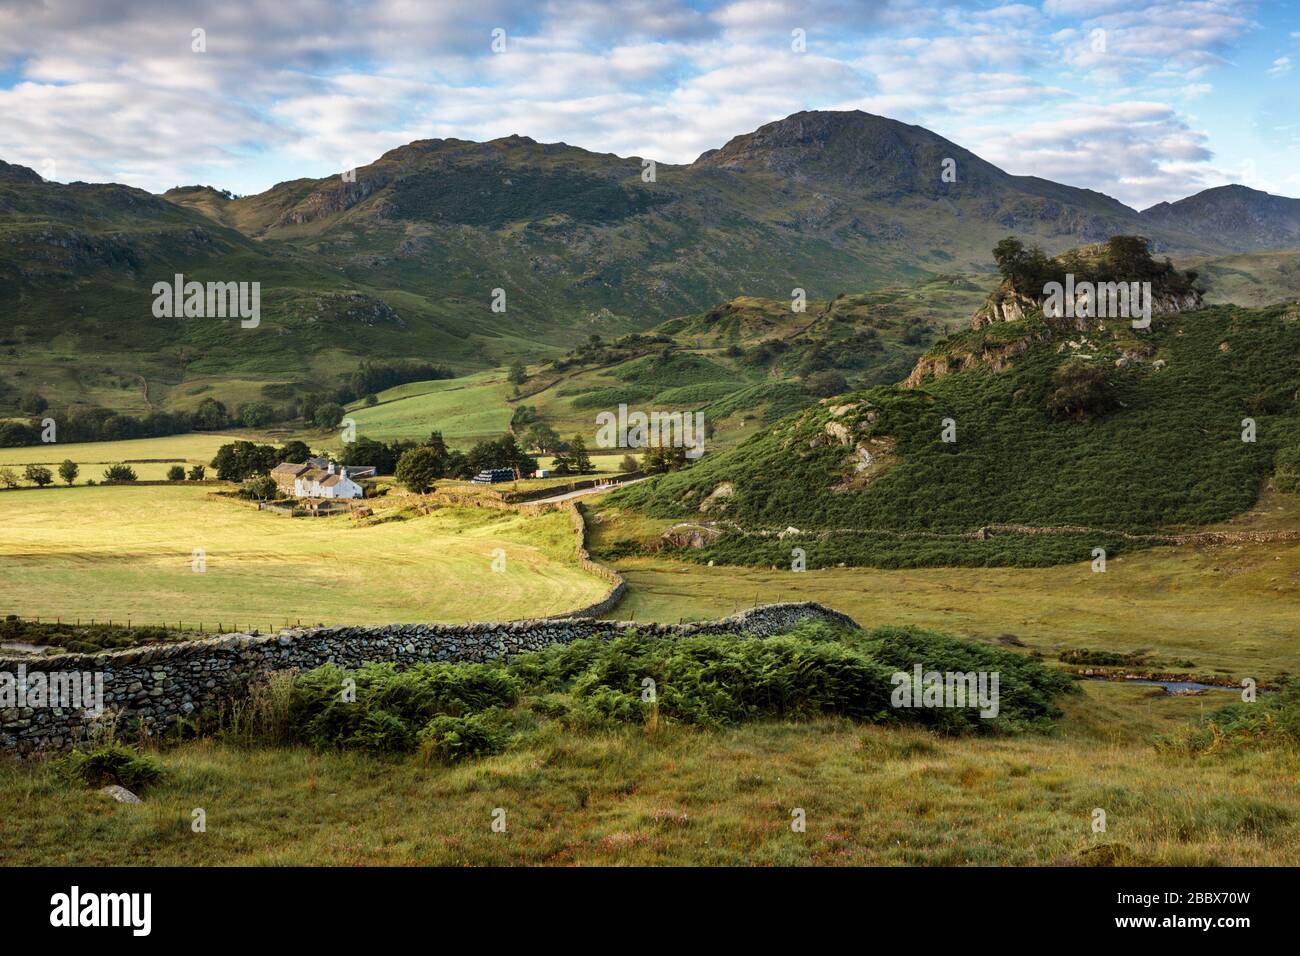 Fell Foot Farm, vicino alla base di Wrynose Pass, Little Langdale, Lake District National Park, Cumbria, Inghilterra Foto Stock